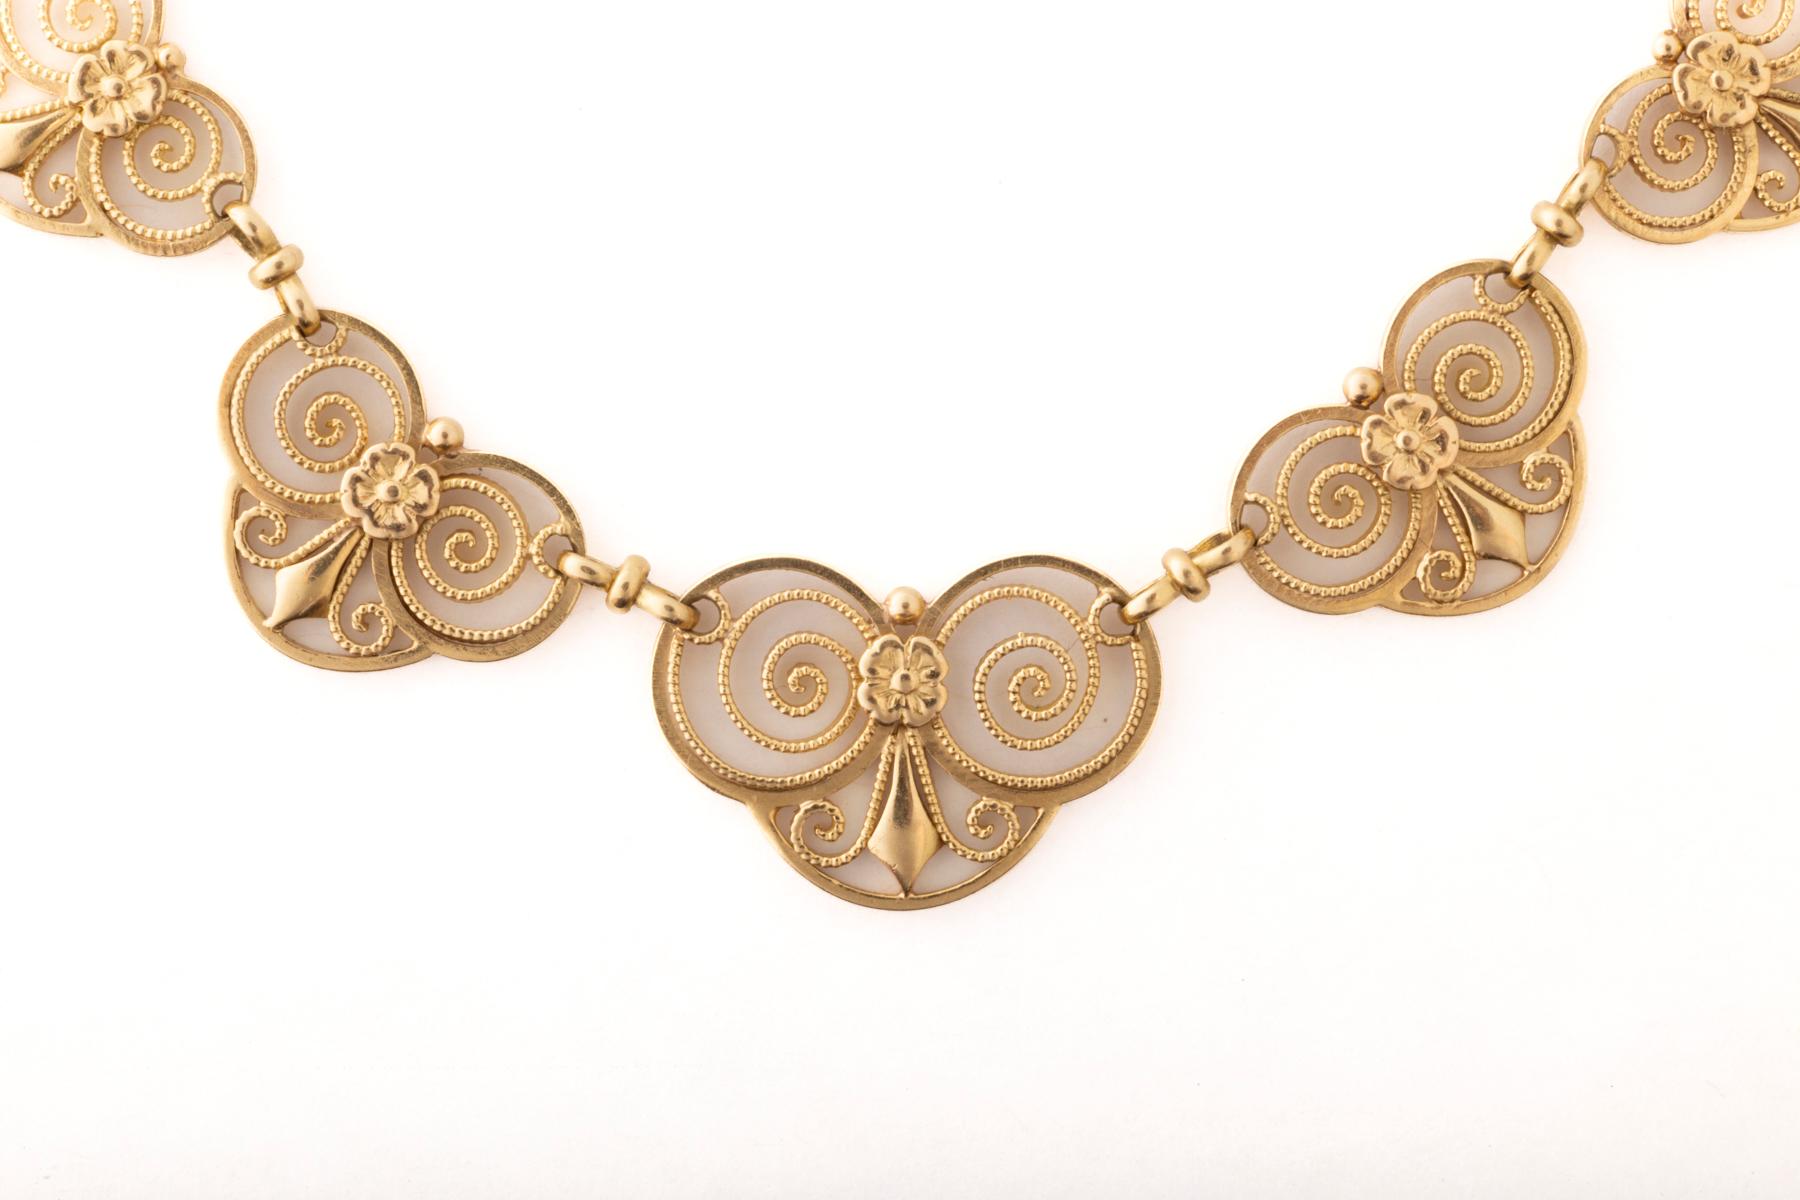 Antique 18 Kt French Art Nouveau Necklace In Excellent Condition For Sale In Stamford, CT